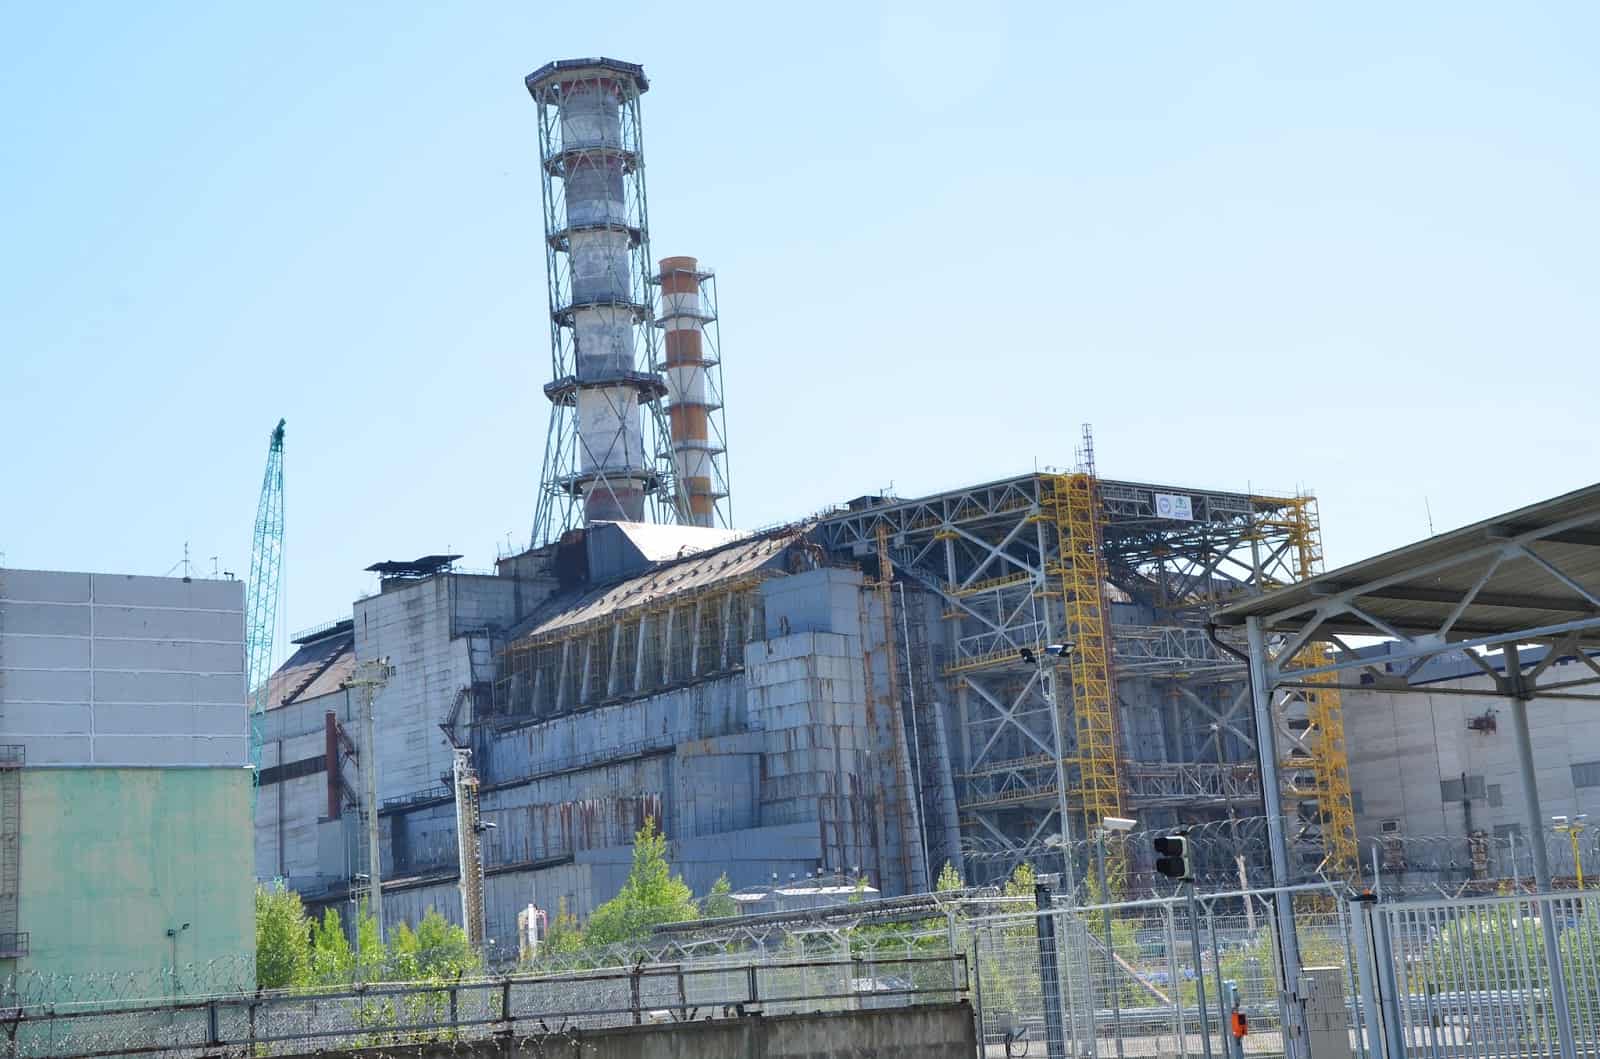 Reactor #4 at Chernobyl Nuclear Power Plant in Chernobyl Exclusion Zone, Ukraine